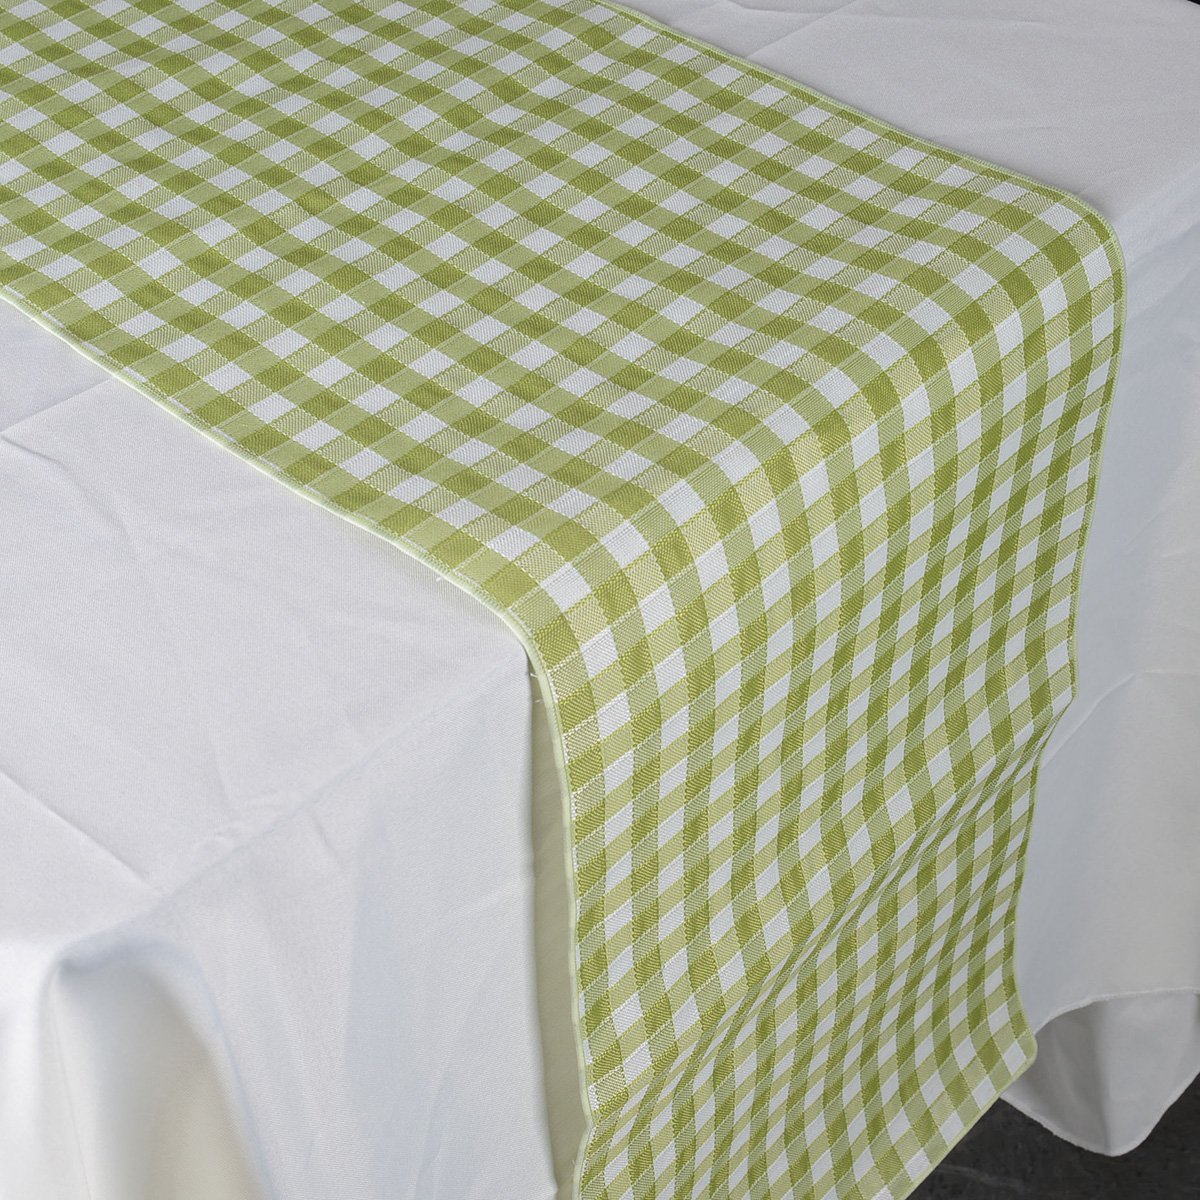 Lime - Checkered/ Plaid Table Runner - ( 14 inch x 90 inch )